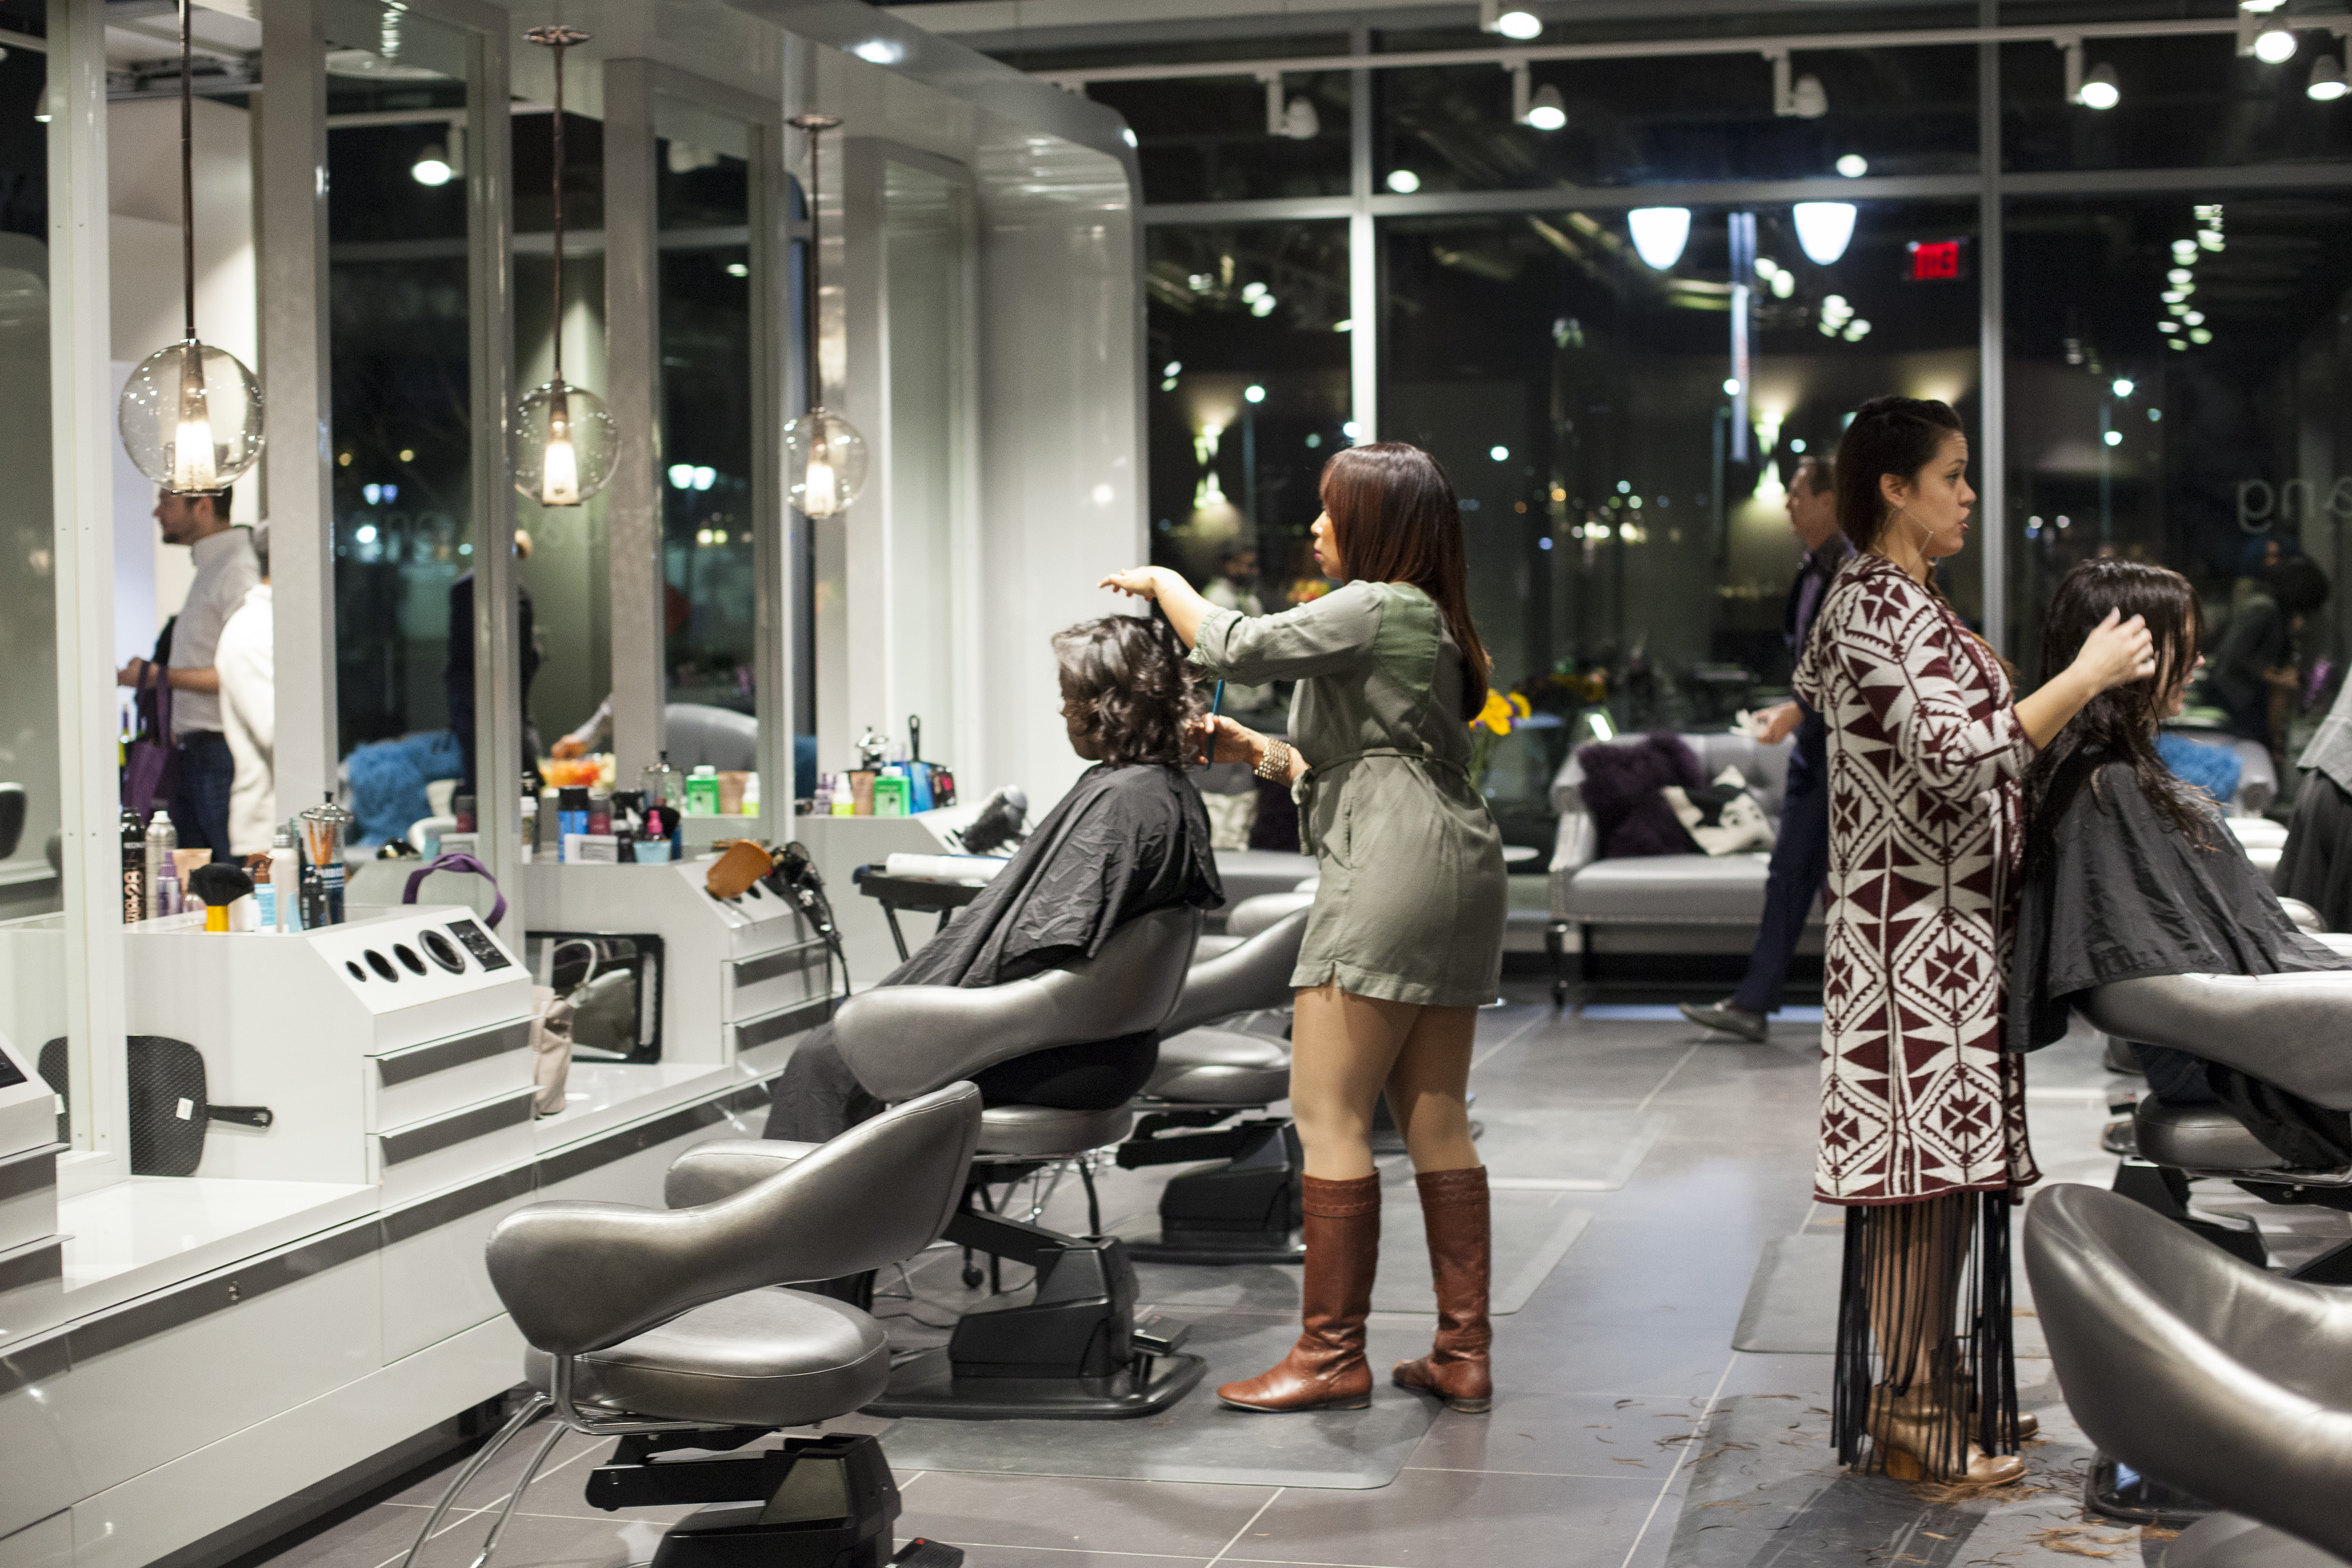 Bang Salon's newest location at Navy Yard, looking as chic as all the others. Photo by María Helena Carey